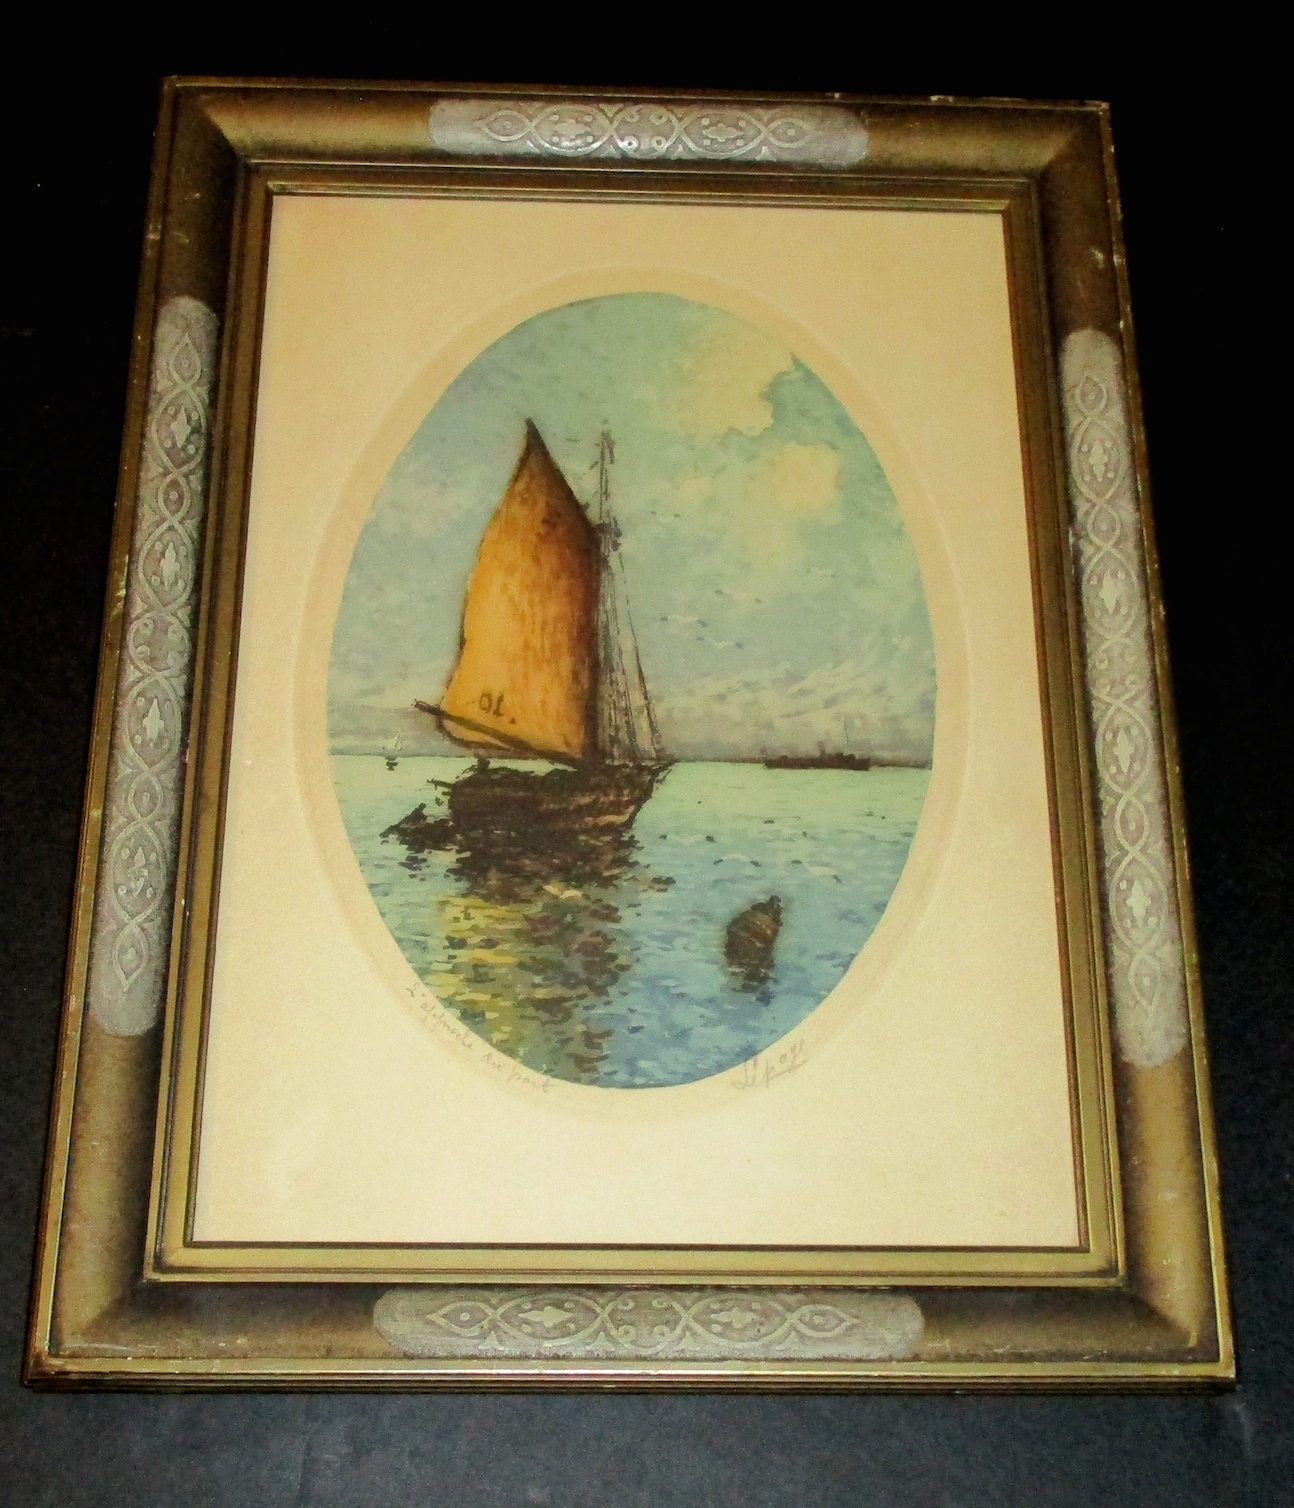 Limited Edition Etching "L'affmoche du Port (Nearing the Harbor)" Signed in Pencil Lepage